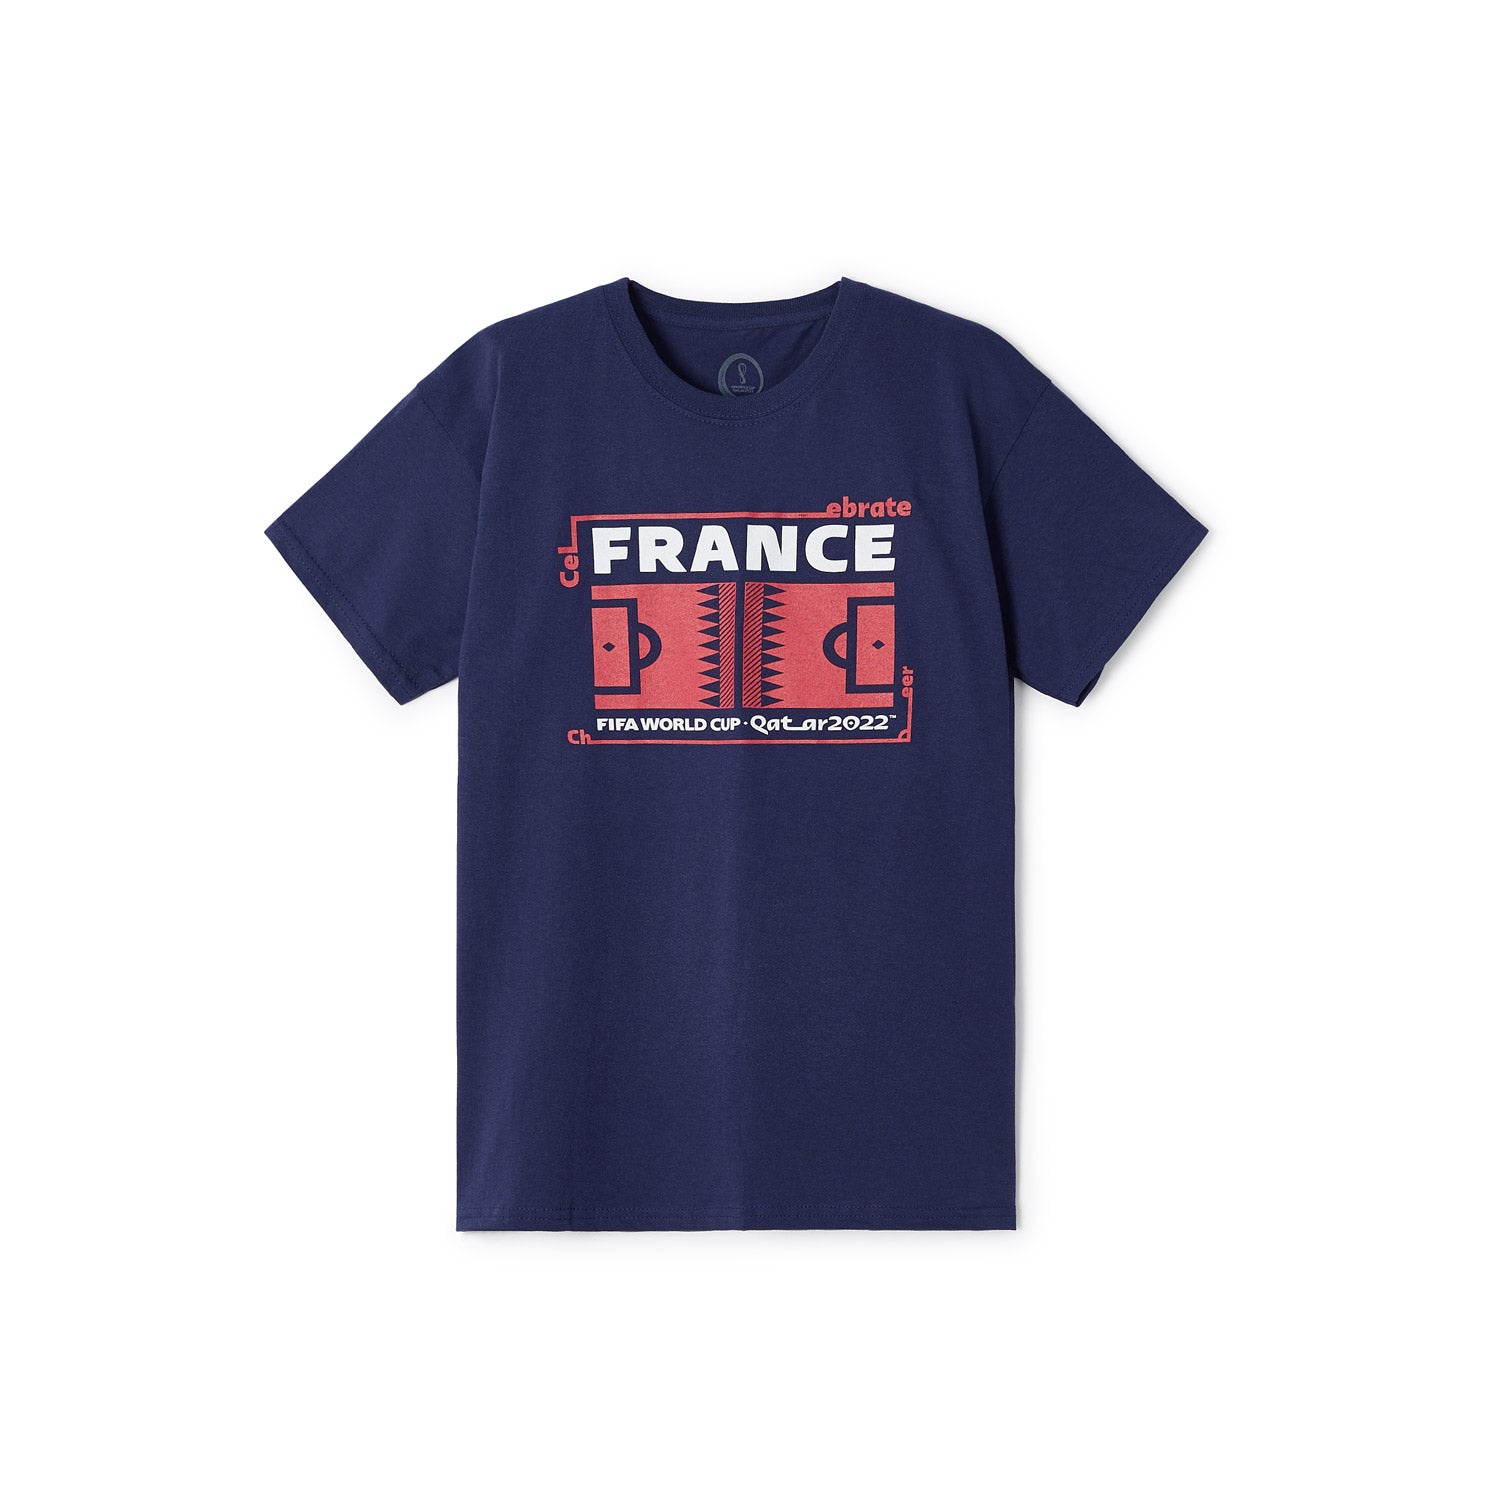 Official France Football Shop - Official FIFA Store